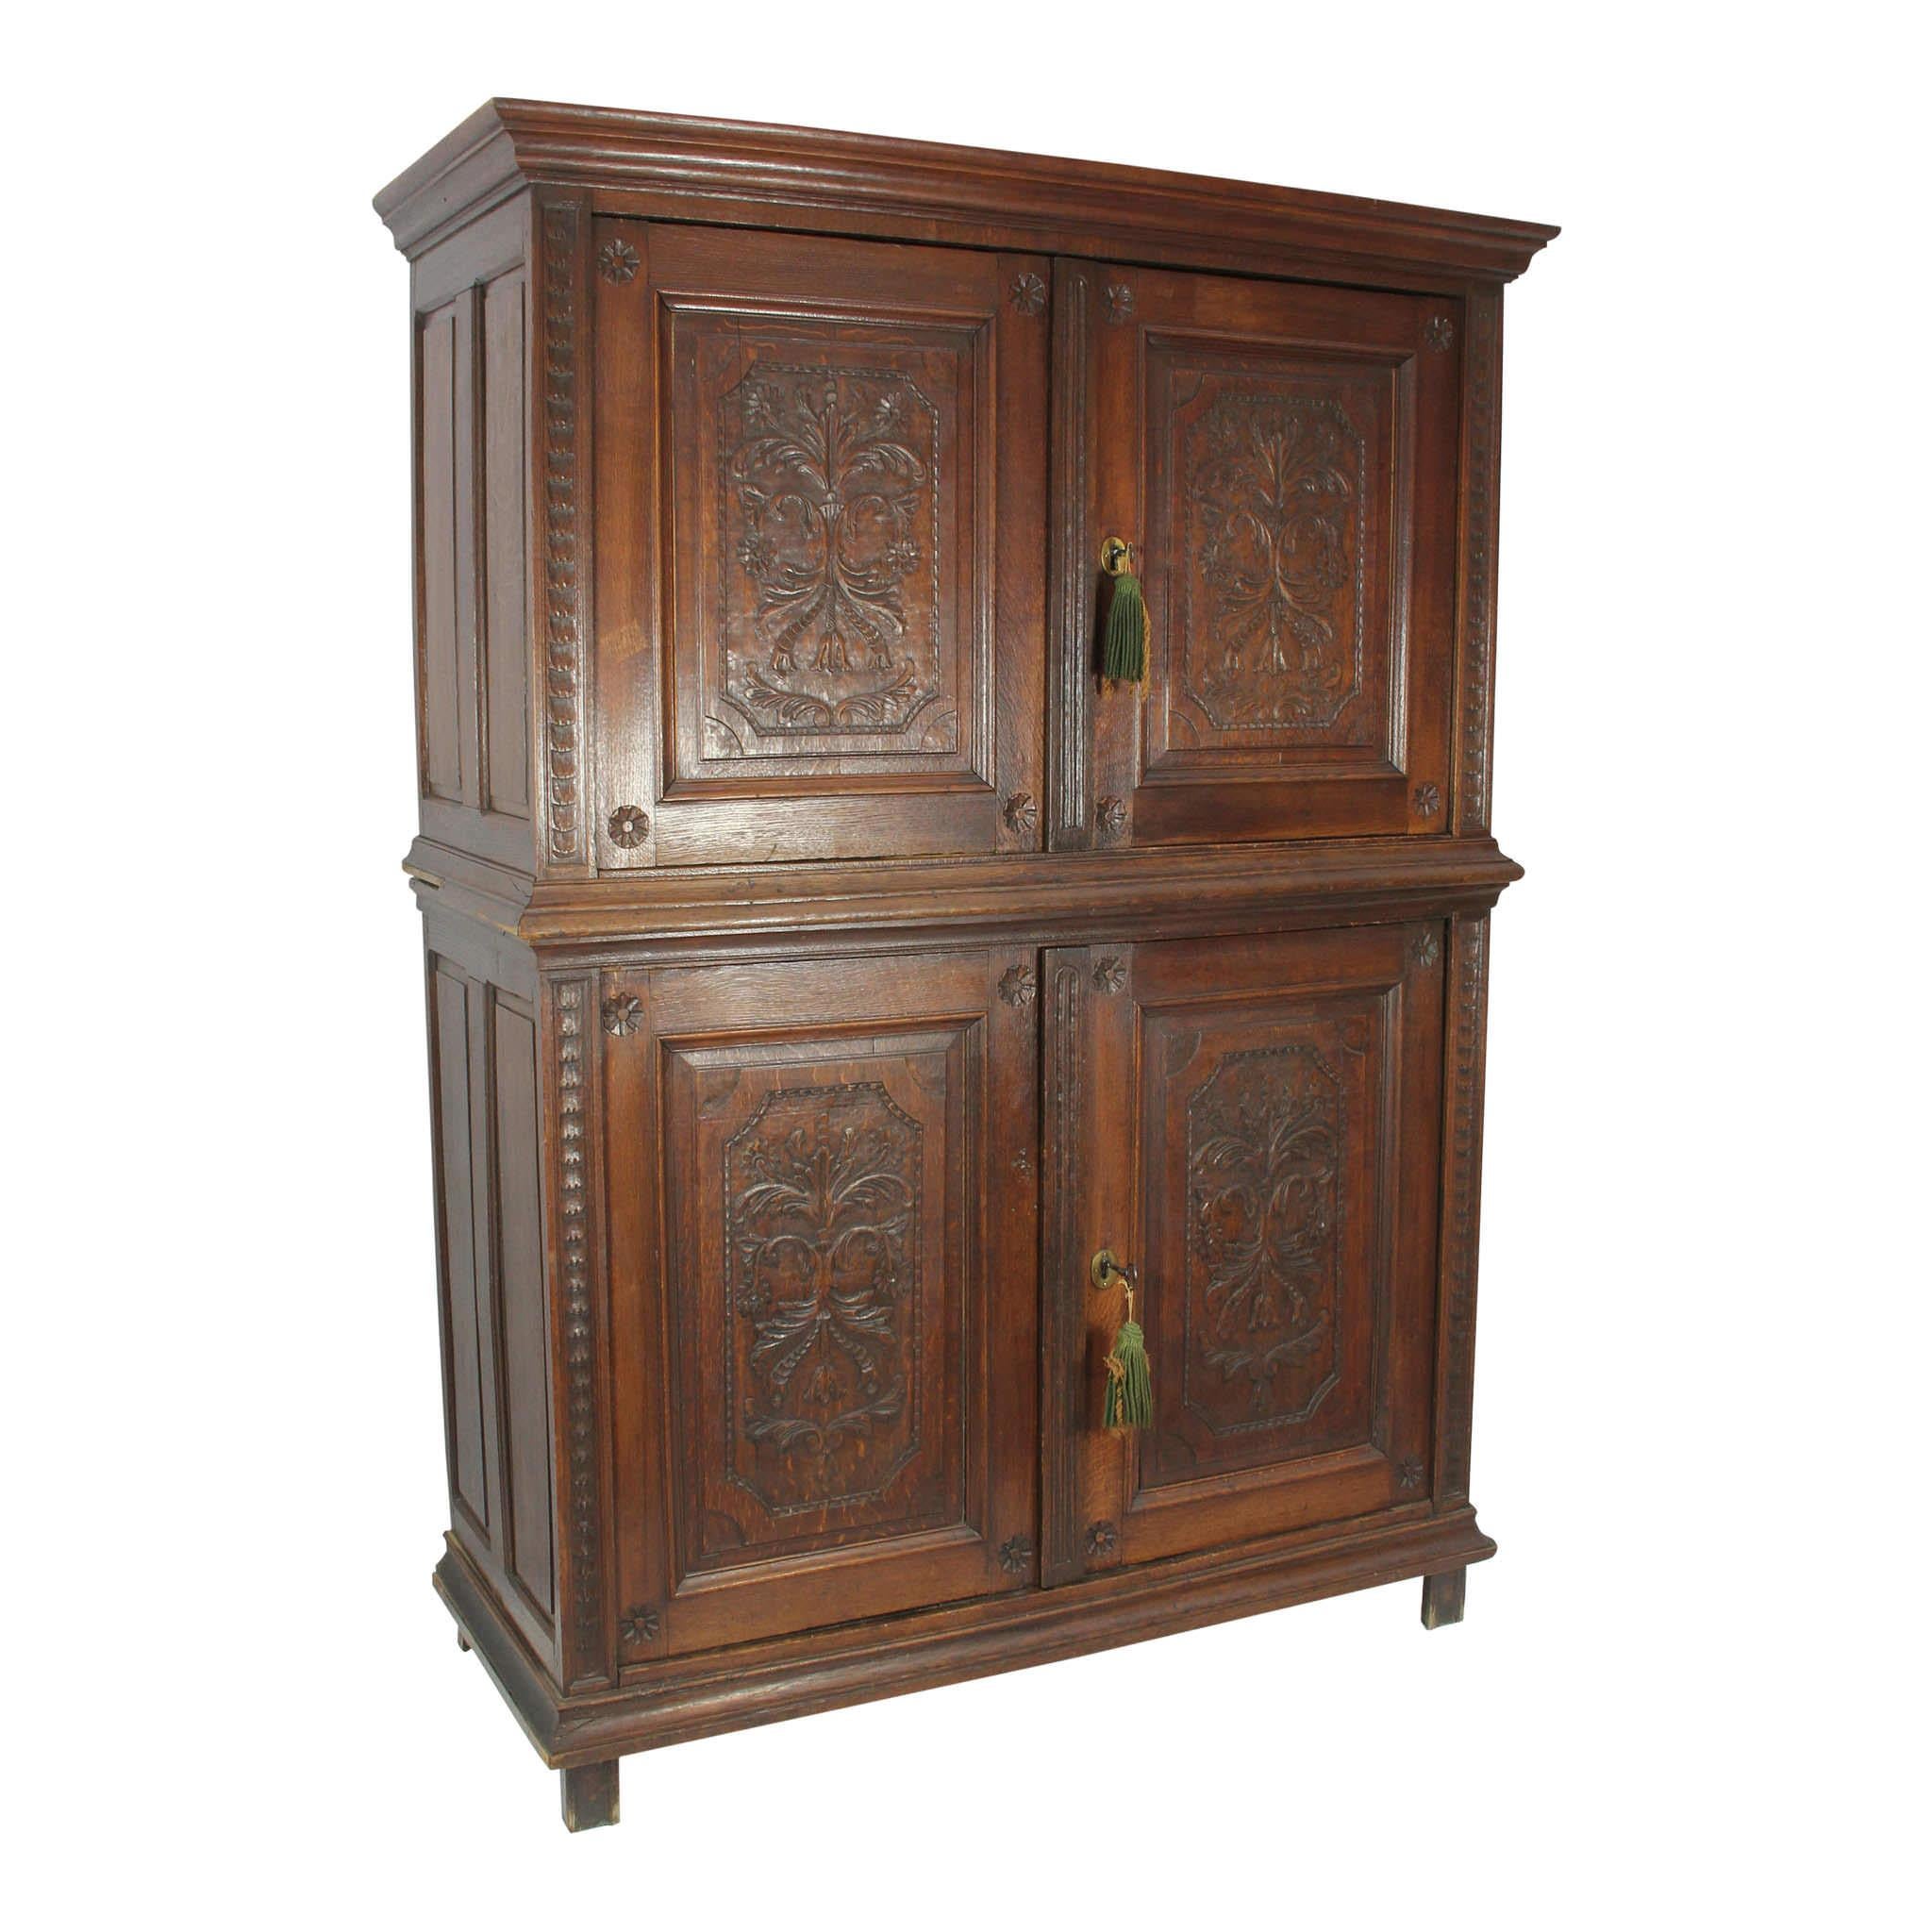 Storage abounds in this four-door cabinet with Louis XV style carvings on the doors. Both the top and bottom pair of doors open to double shelves. Crown molding at the top and raised panels on the sides add dimension to the piece. The cabinet stands